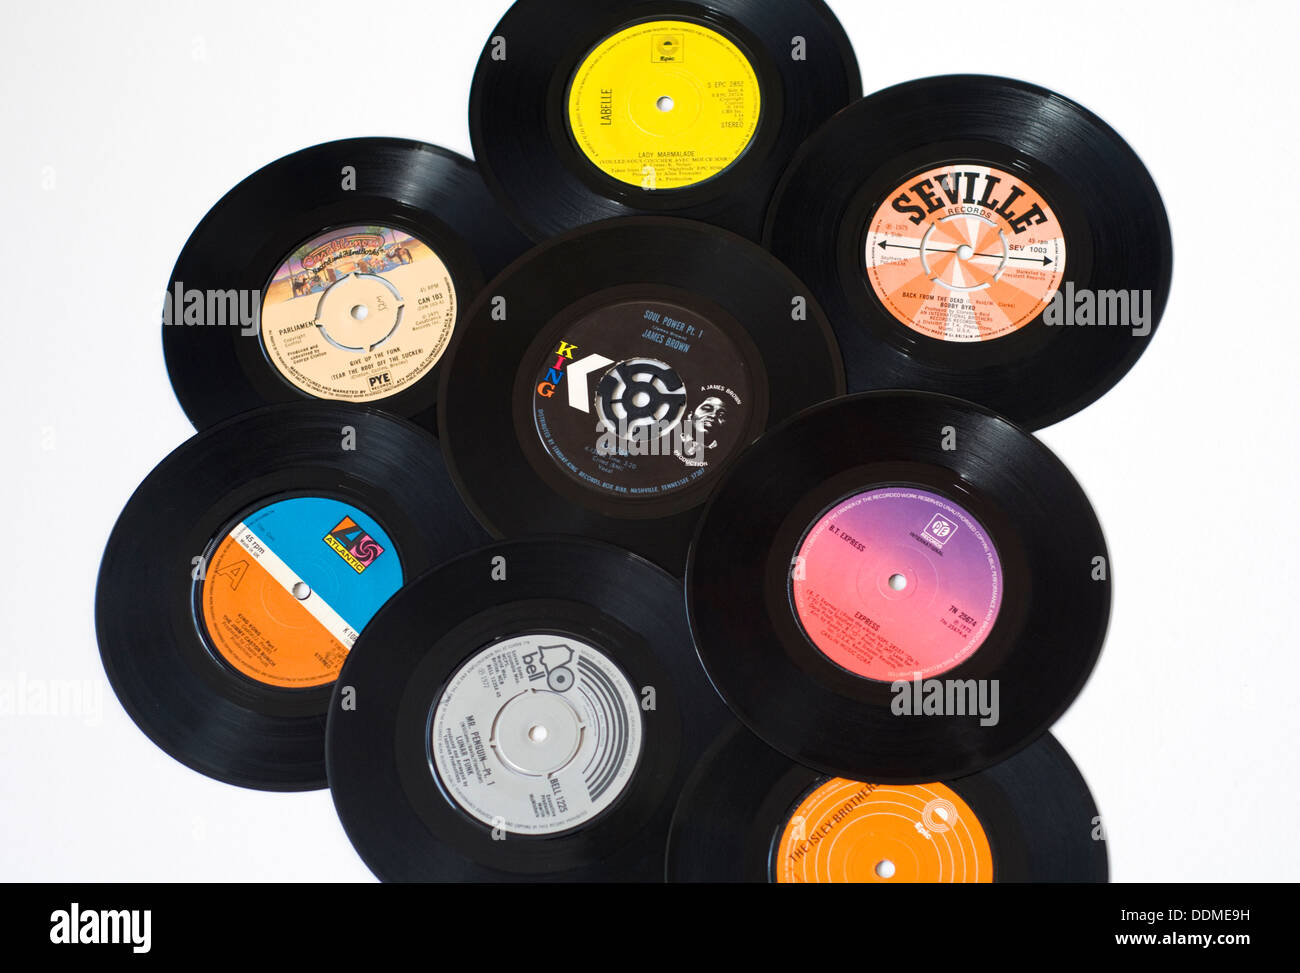 A collection of funk and soul music vinyl records (singles) from the 1970s Stock Photo